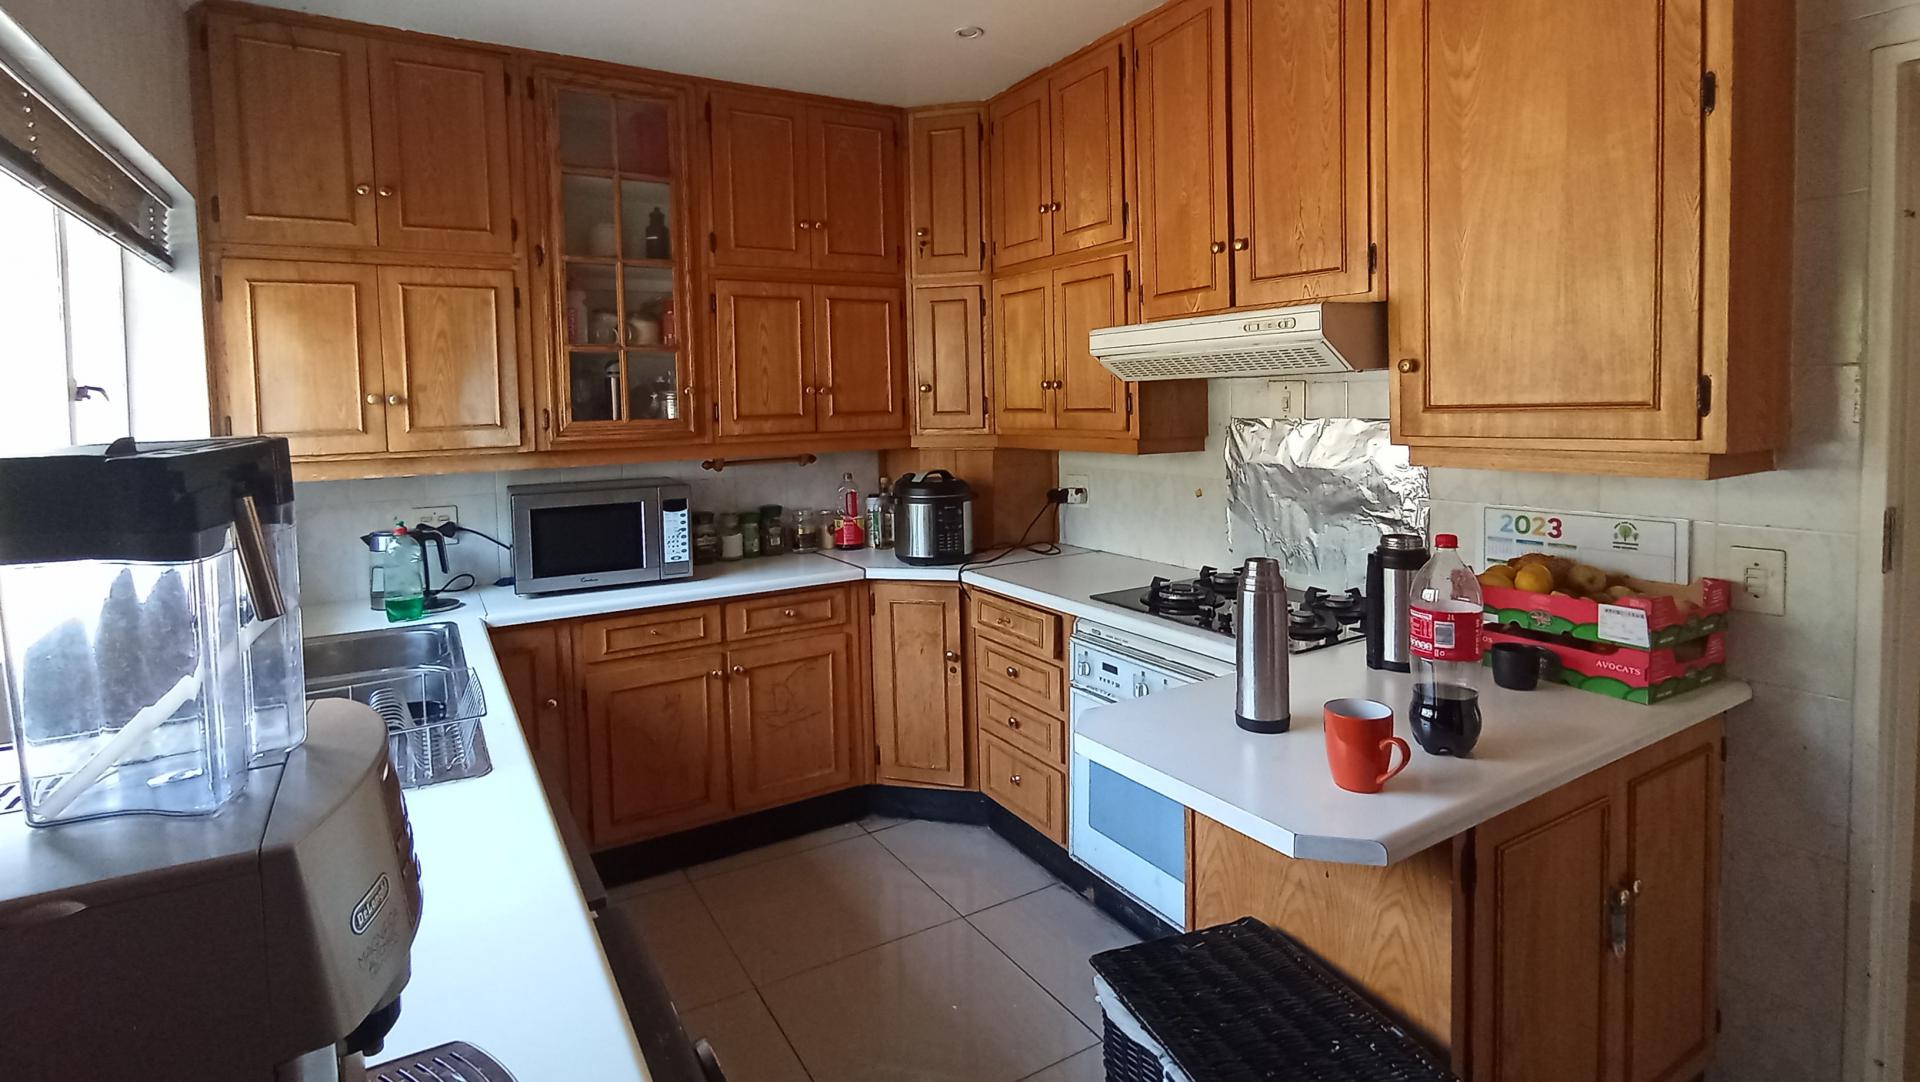 Kitchen - 18 square meters of property in Parkmore